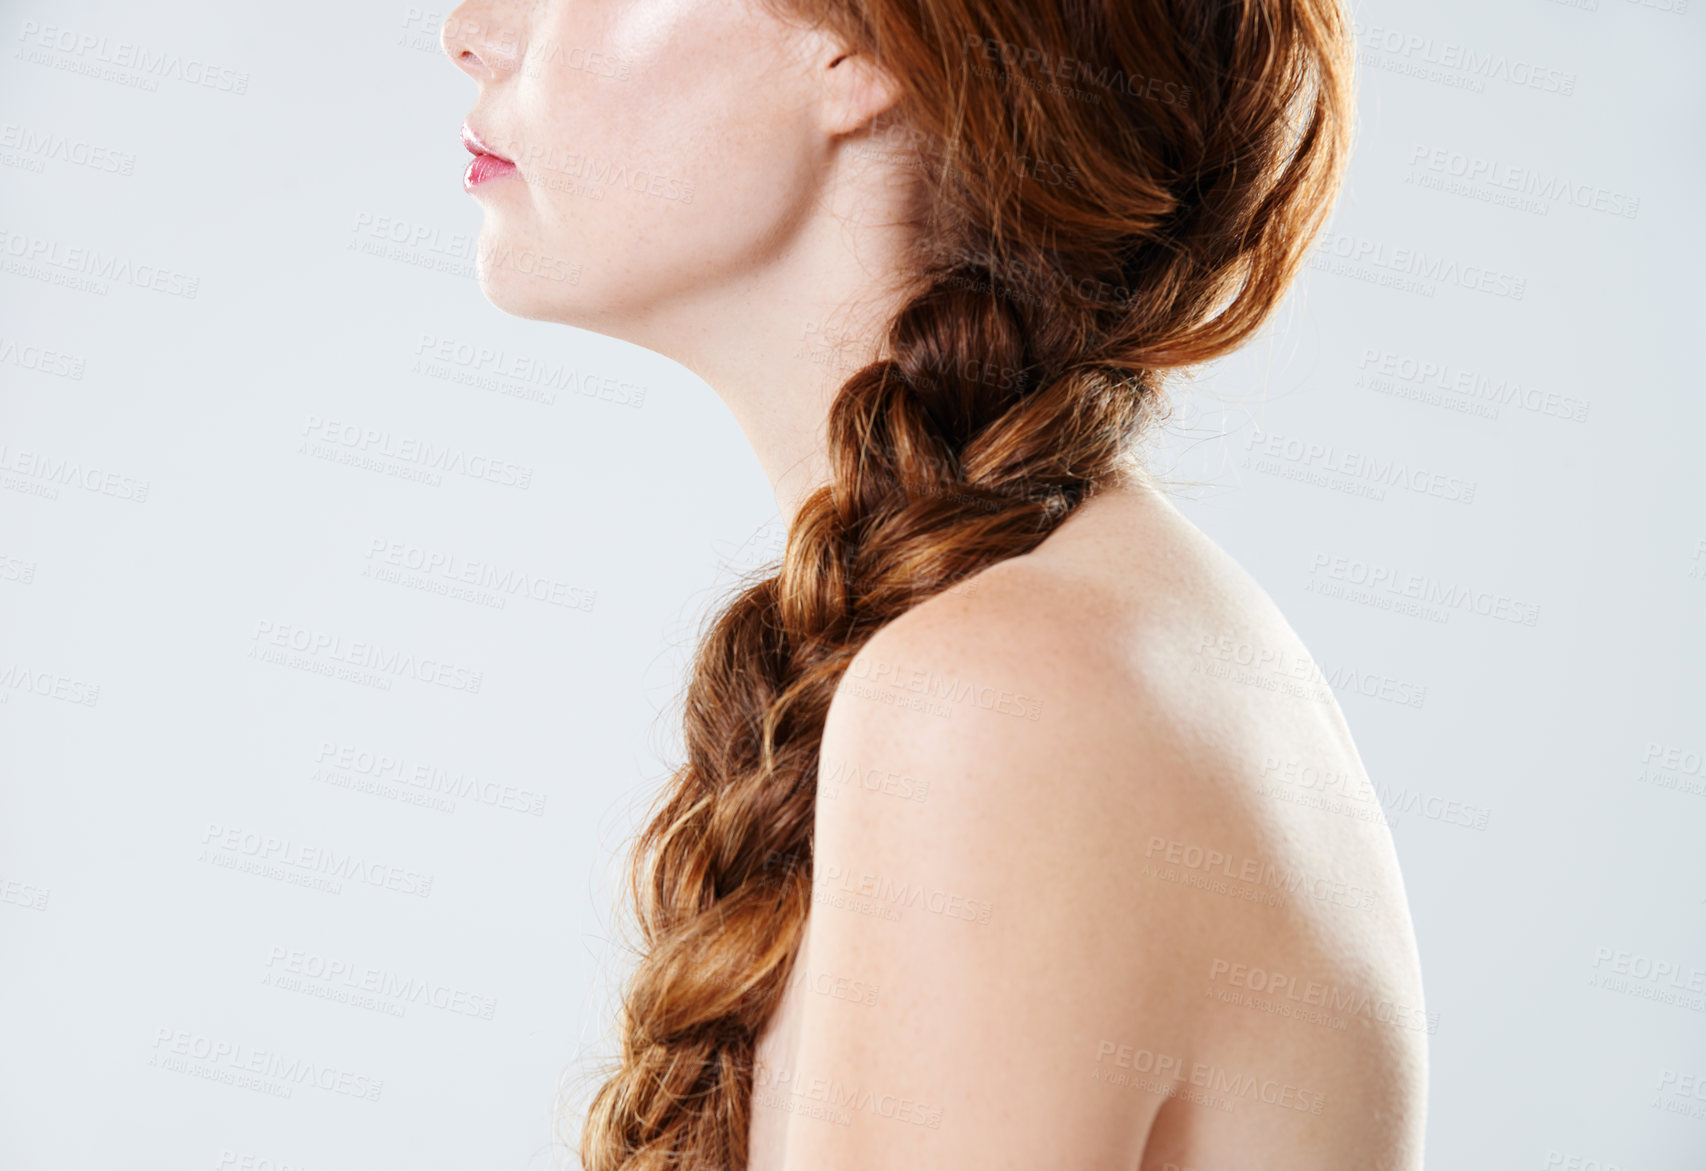 Buy stock photo Closeup of a woman with braided red hair isolated against grey background in studio with copyspace. Zoomed in on model posing shirtless and topless. Confident gorgeous redhead with french plait